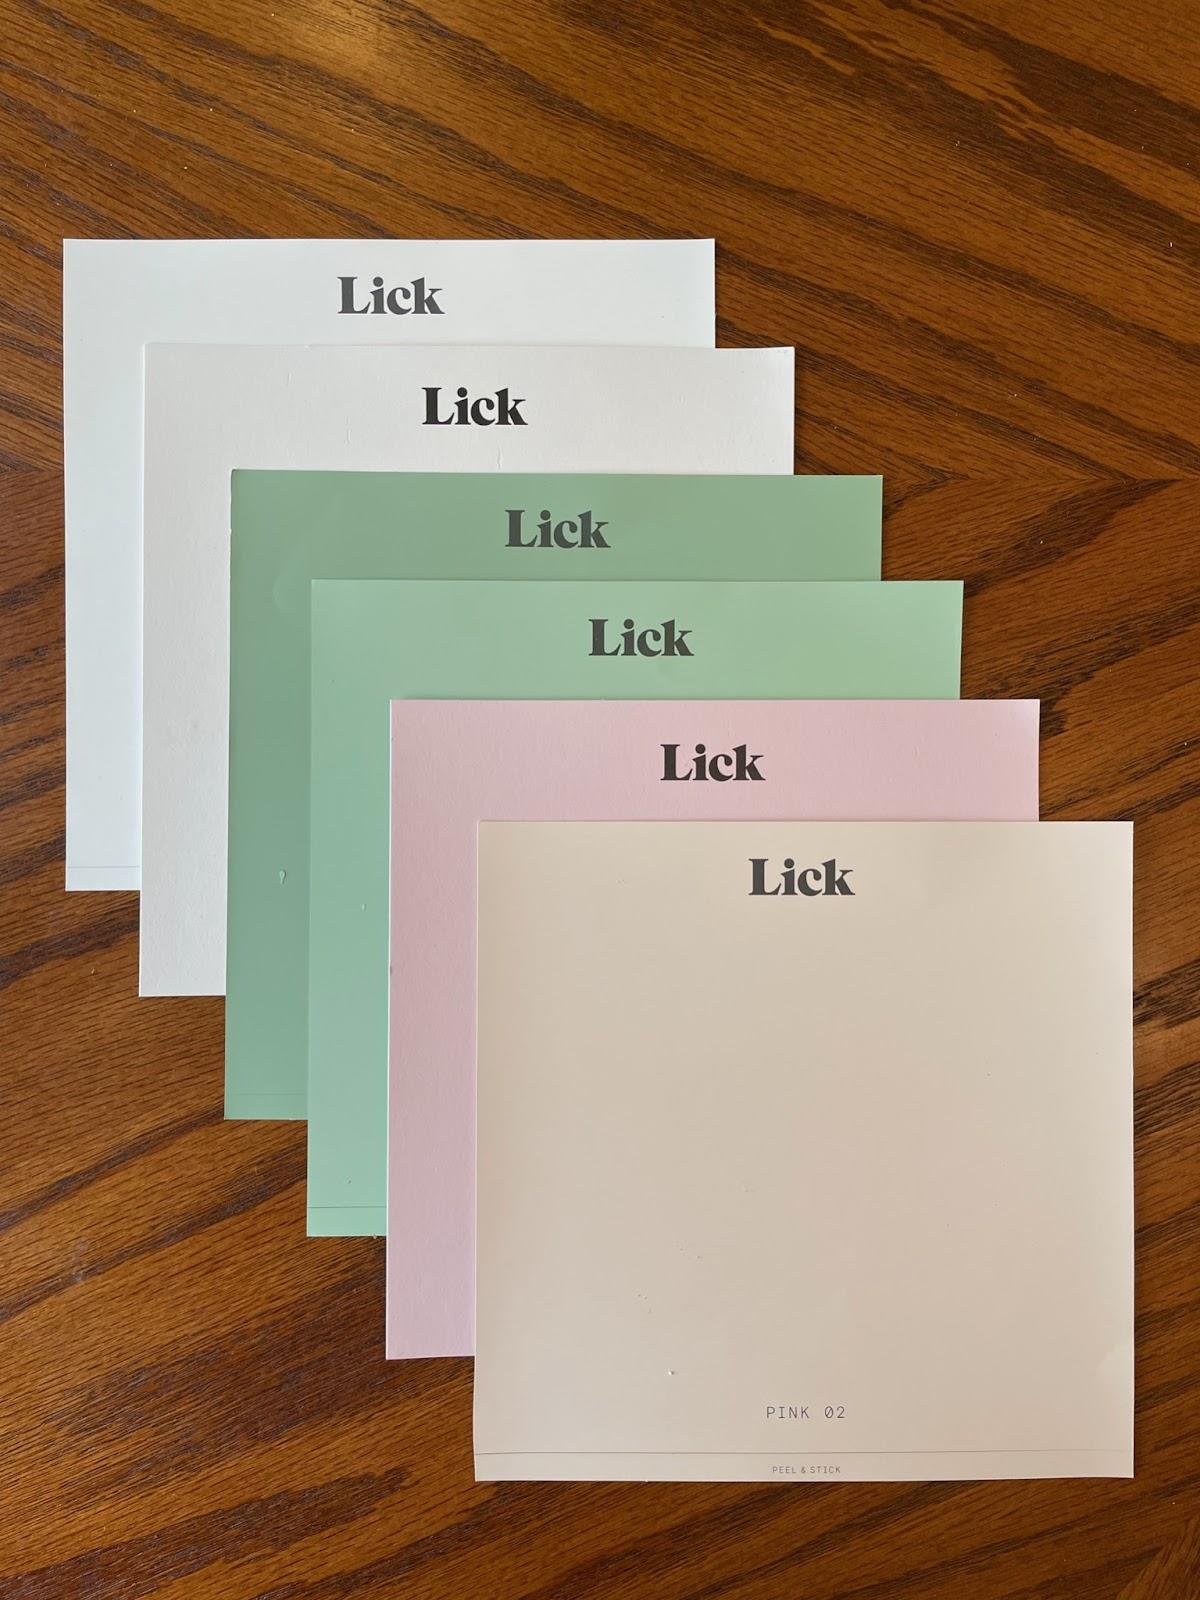 Lick's peel and stick paint samples